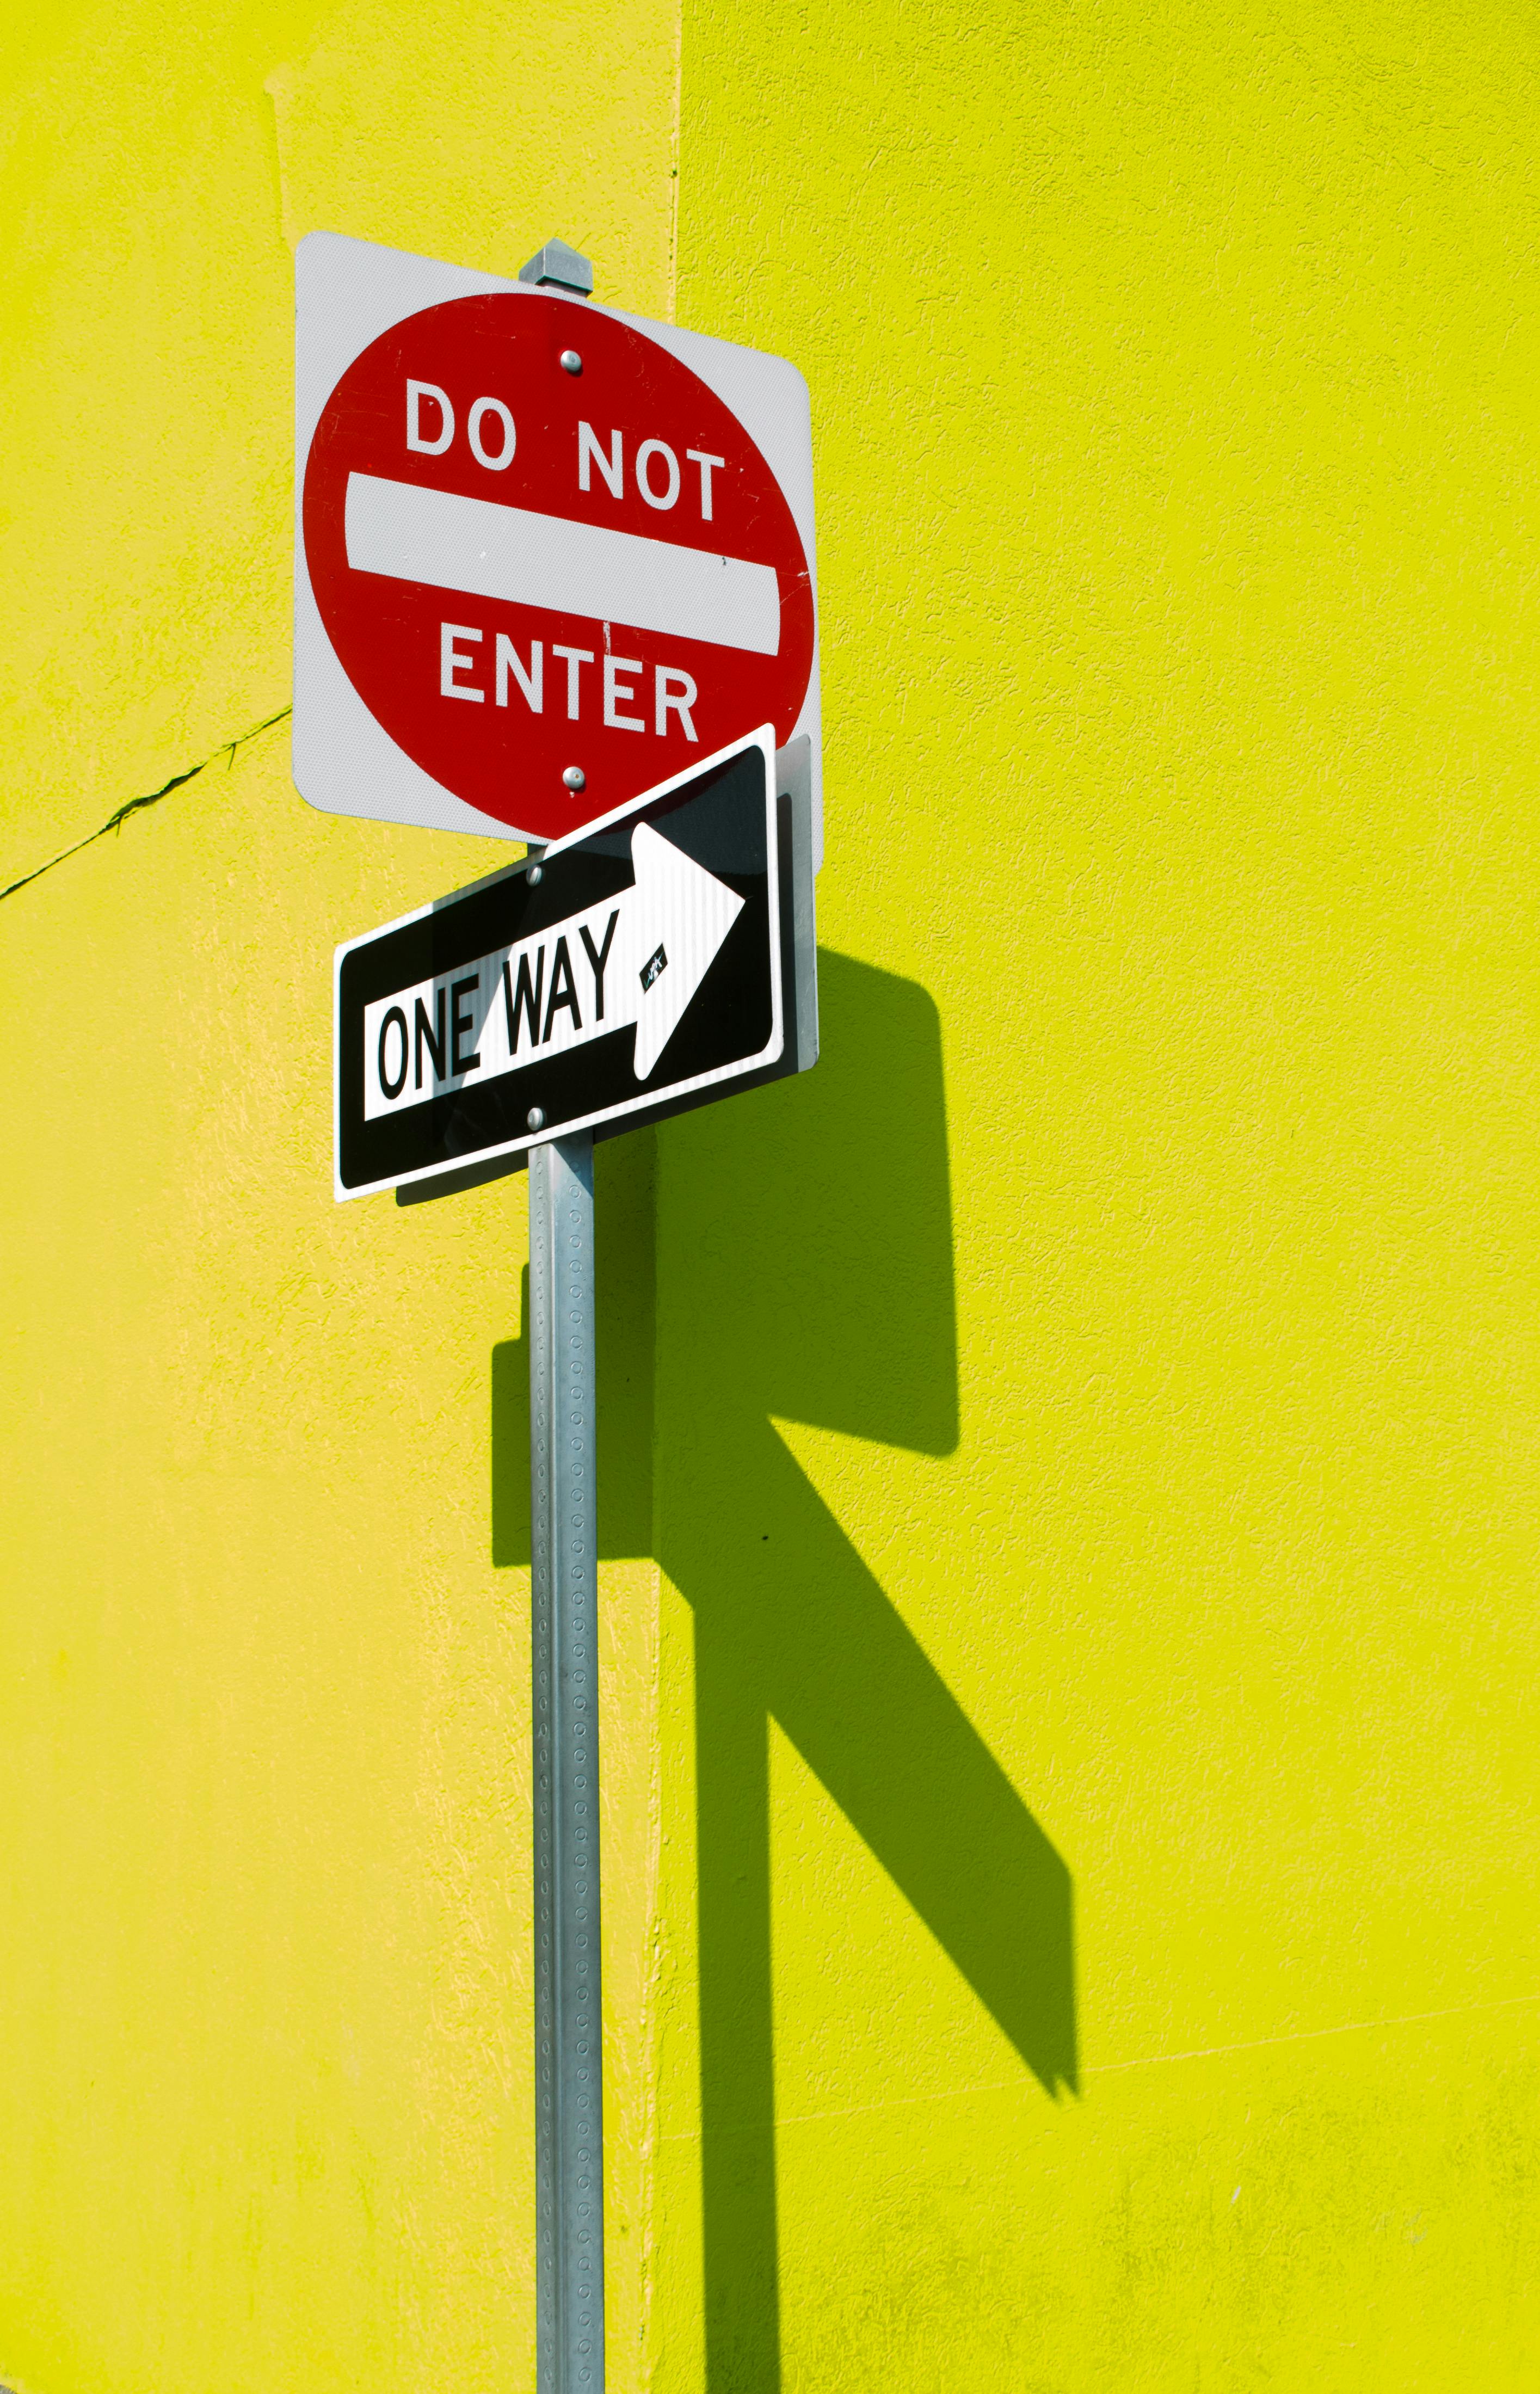 street signs casting shadow on yellow wall